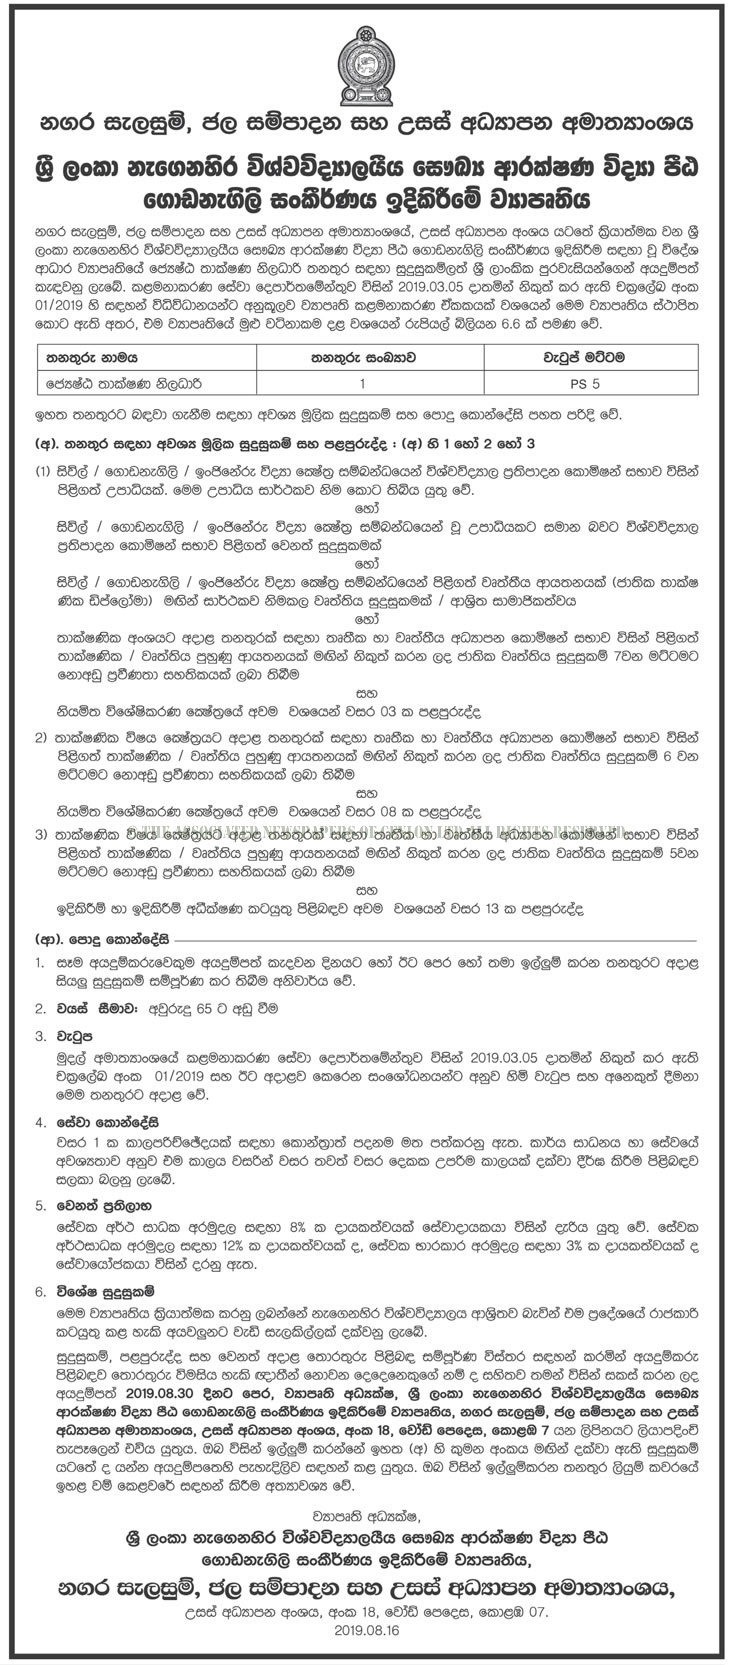 Ministry of City Planning, Water Supply & Higher Education Job Vacancies 